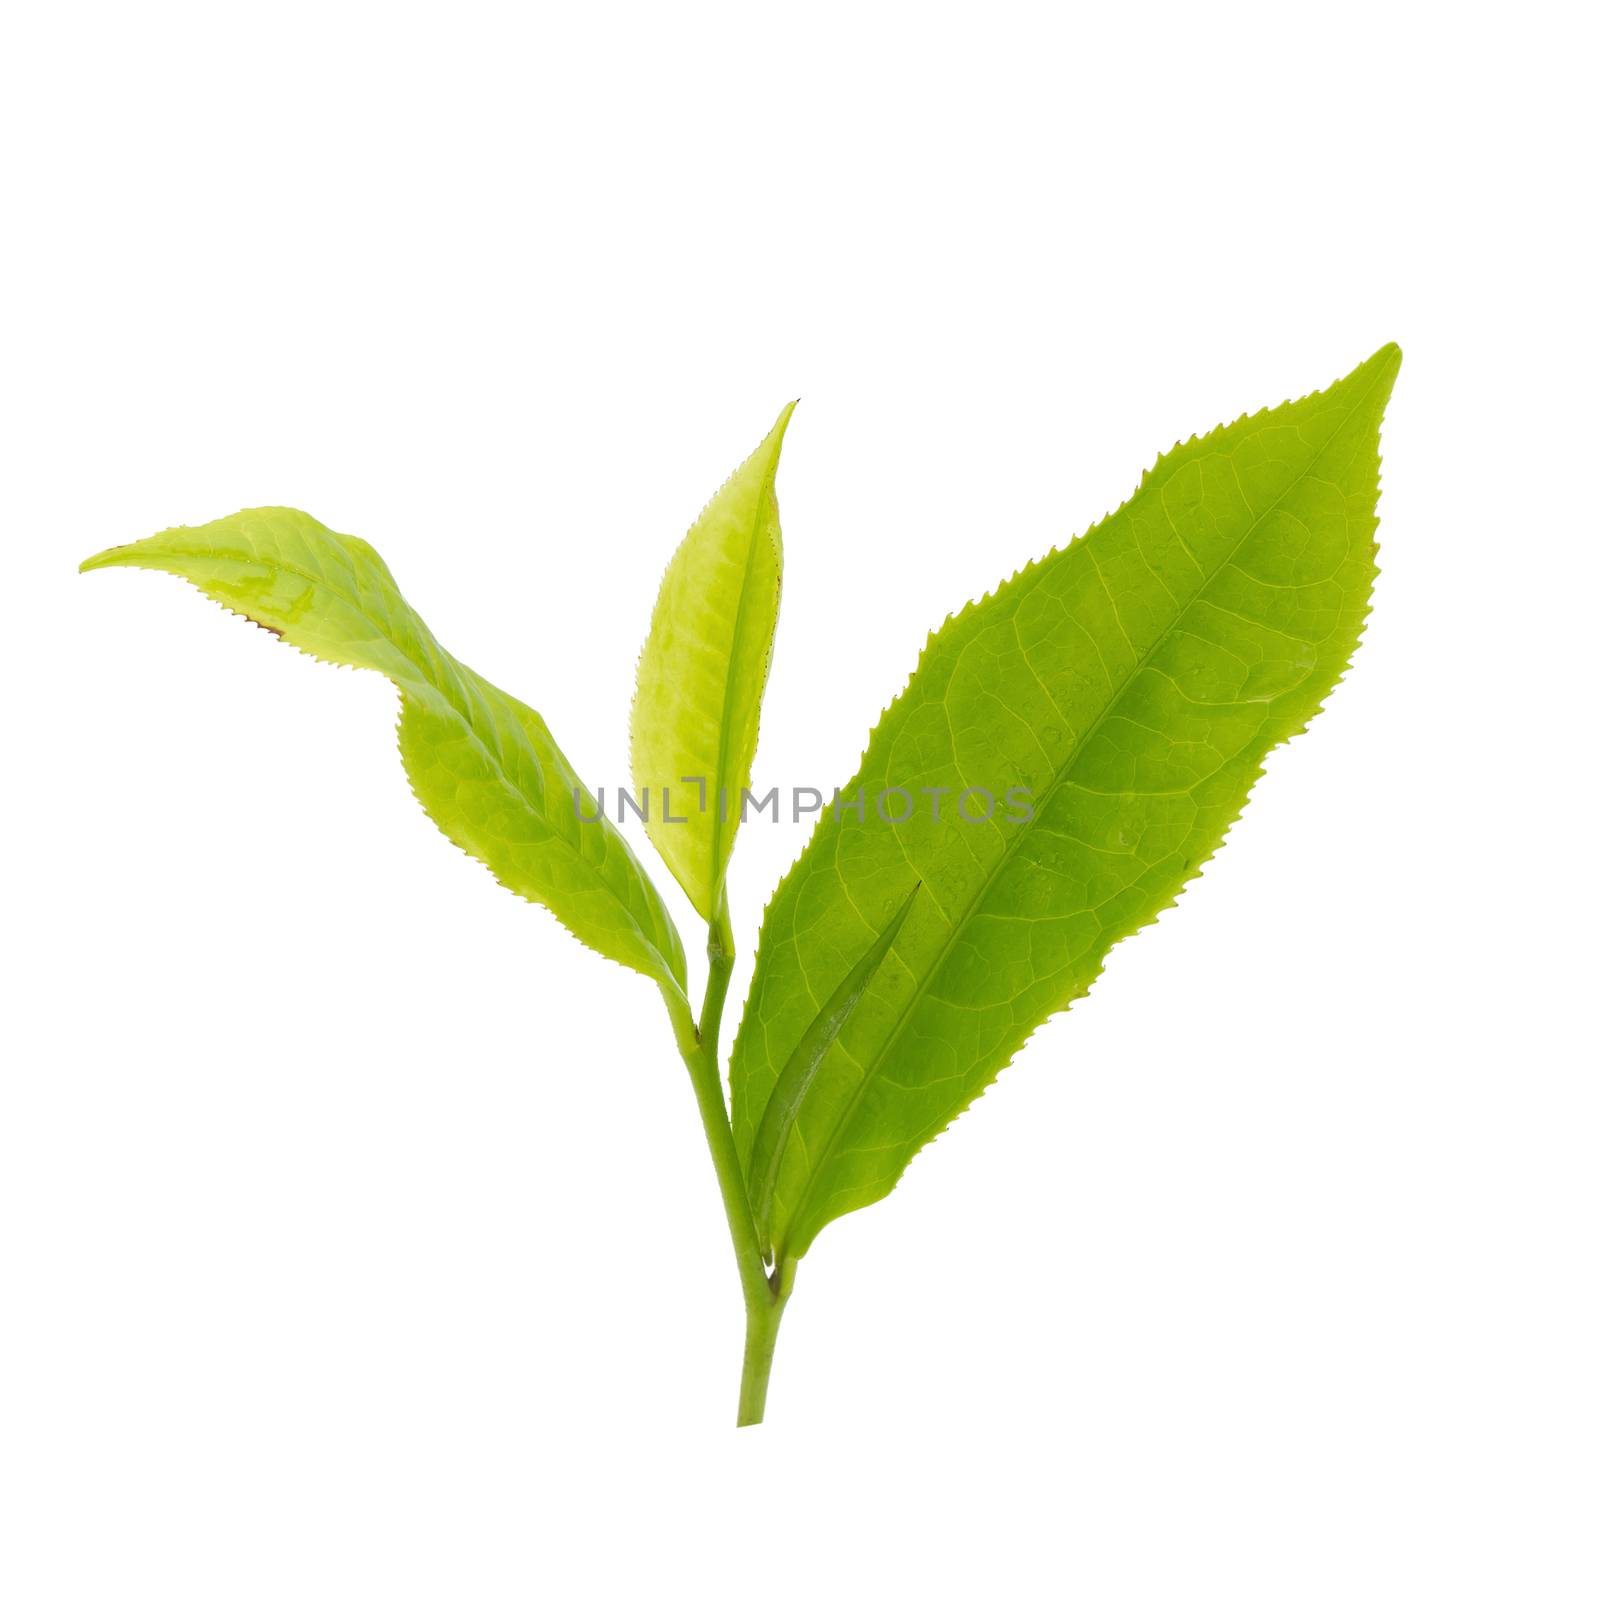 Fresh tea leaves isolated on the white background.